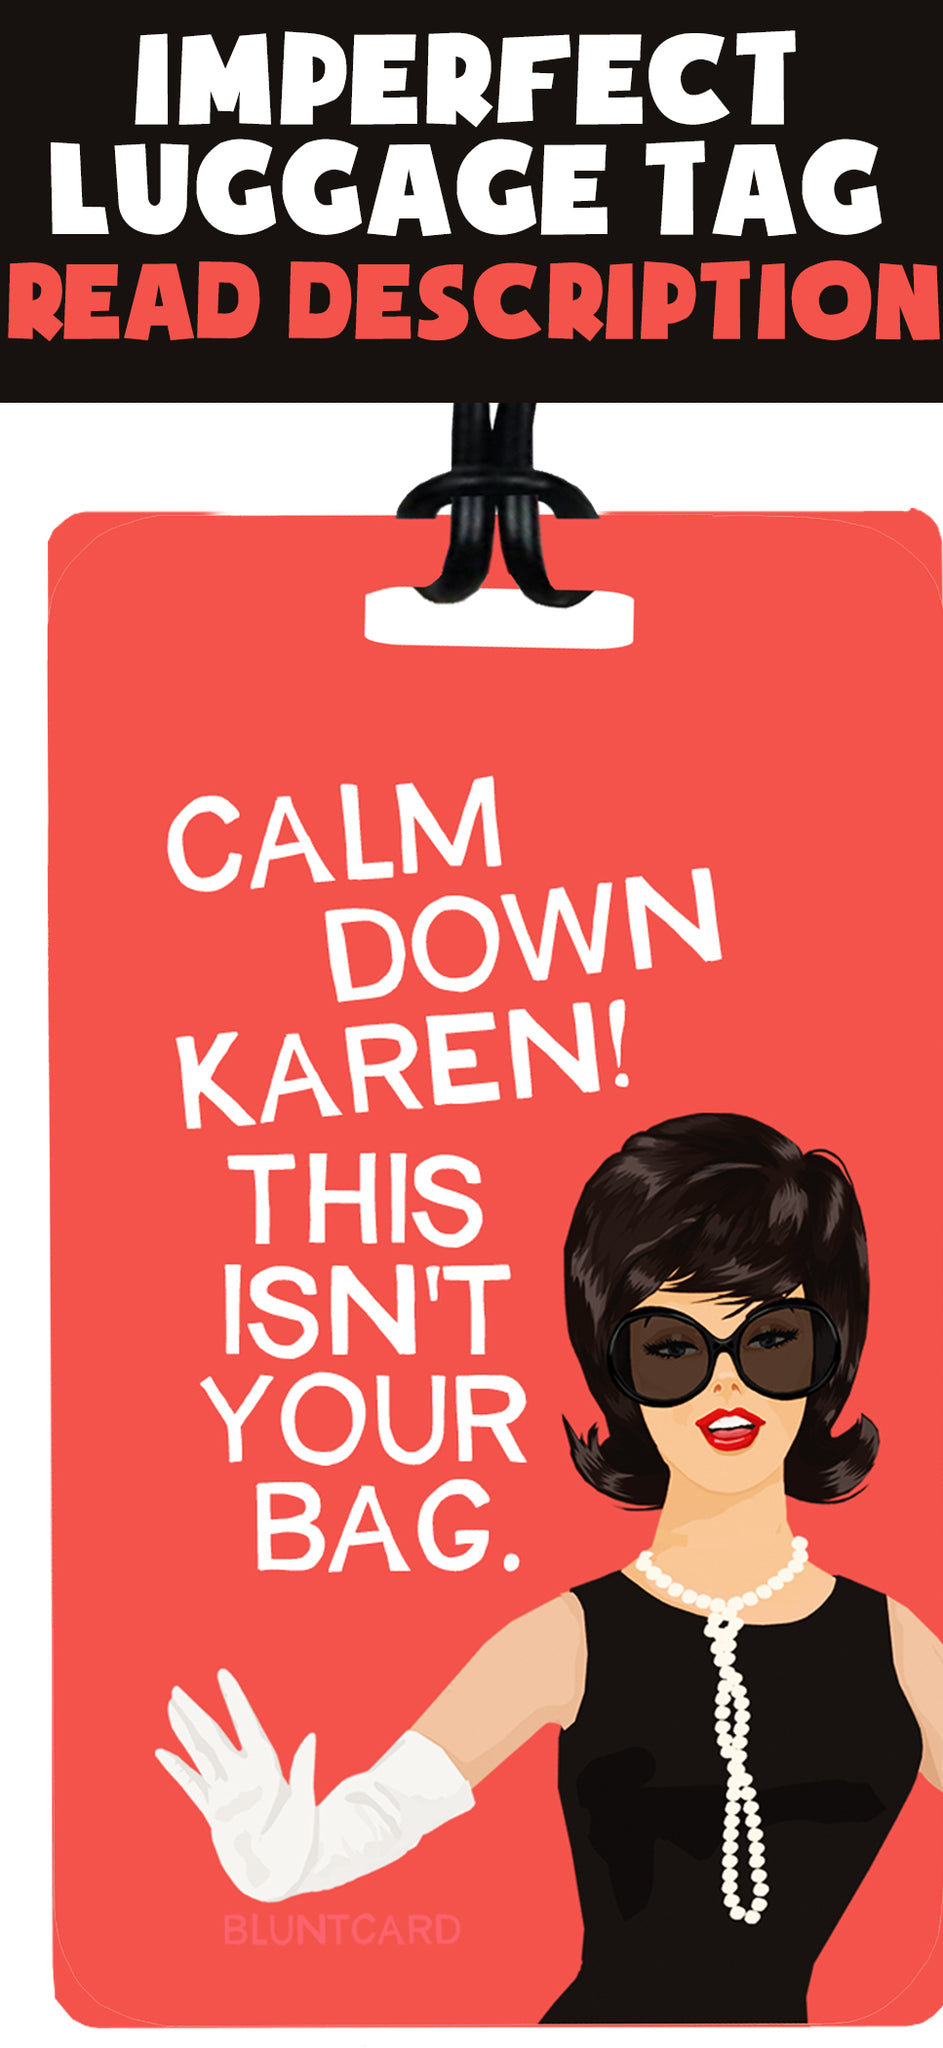 Imperfect Luggage Tag - Calm down Karen